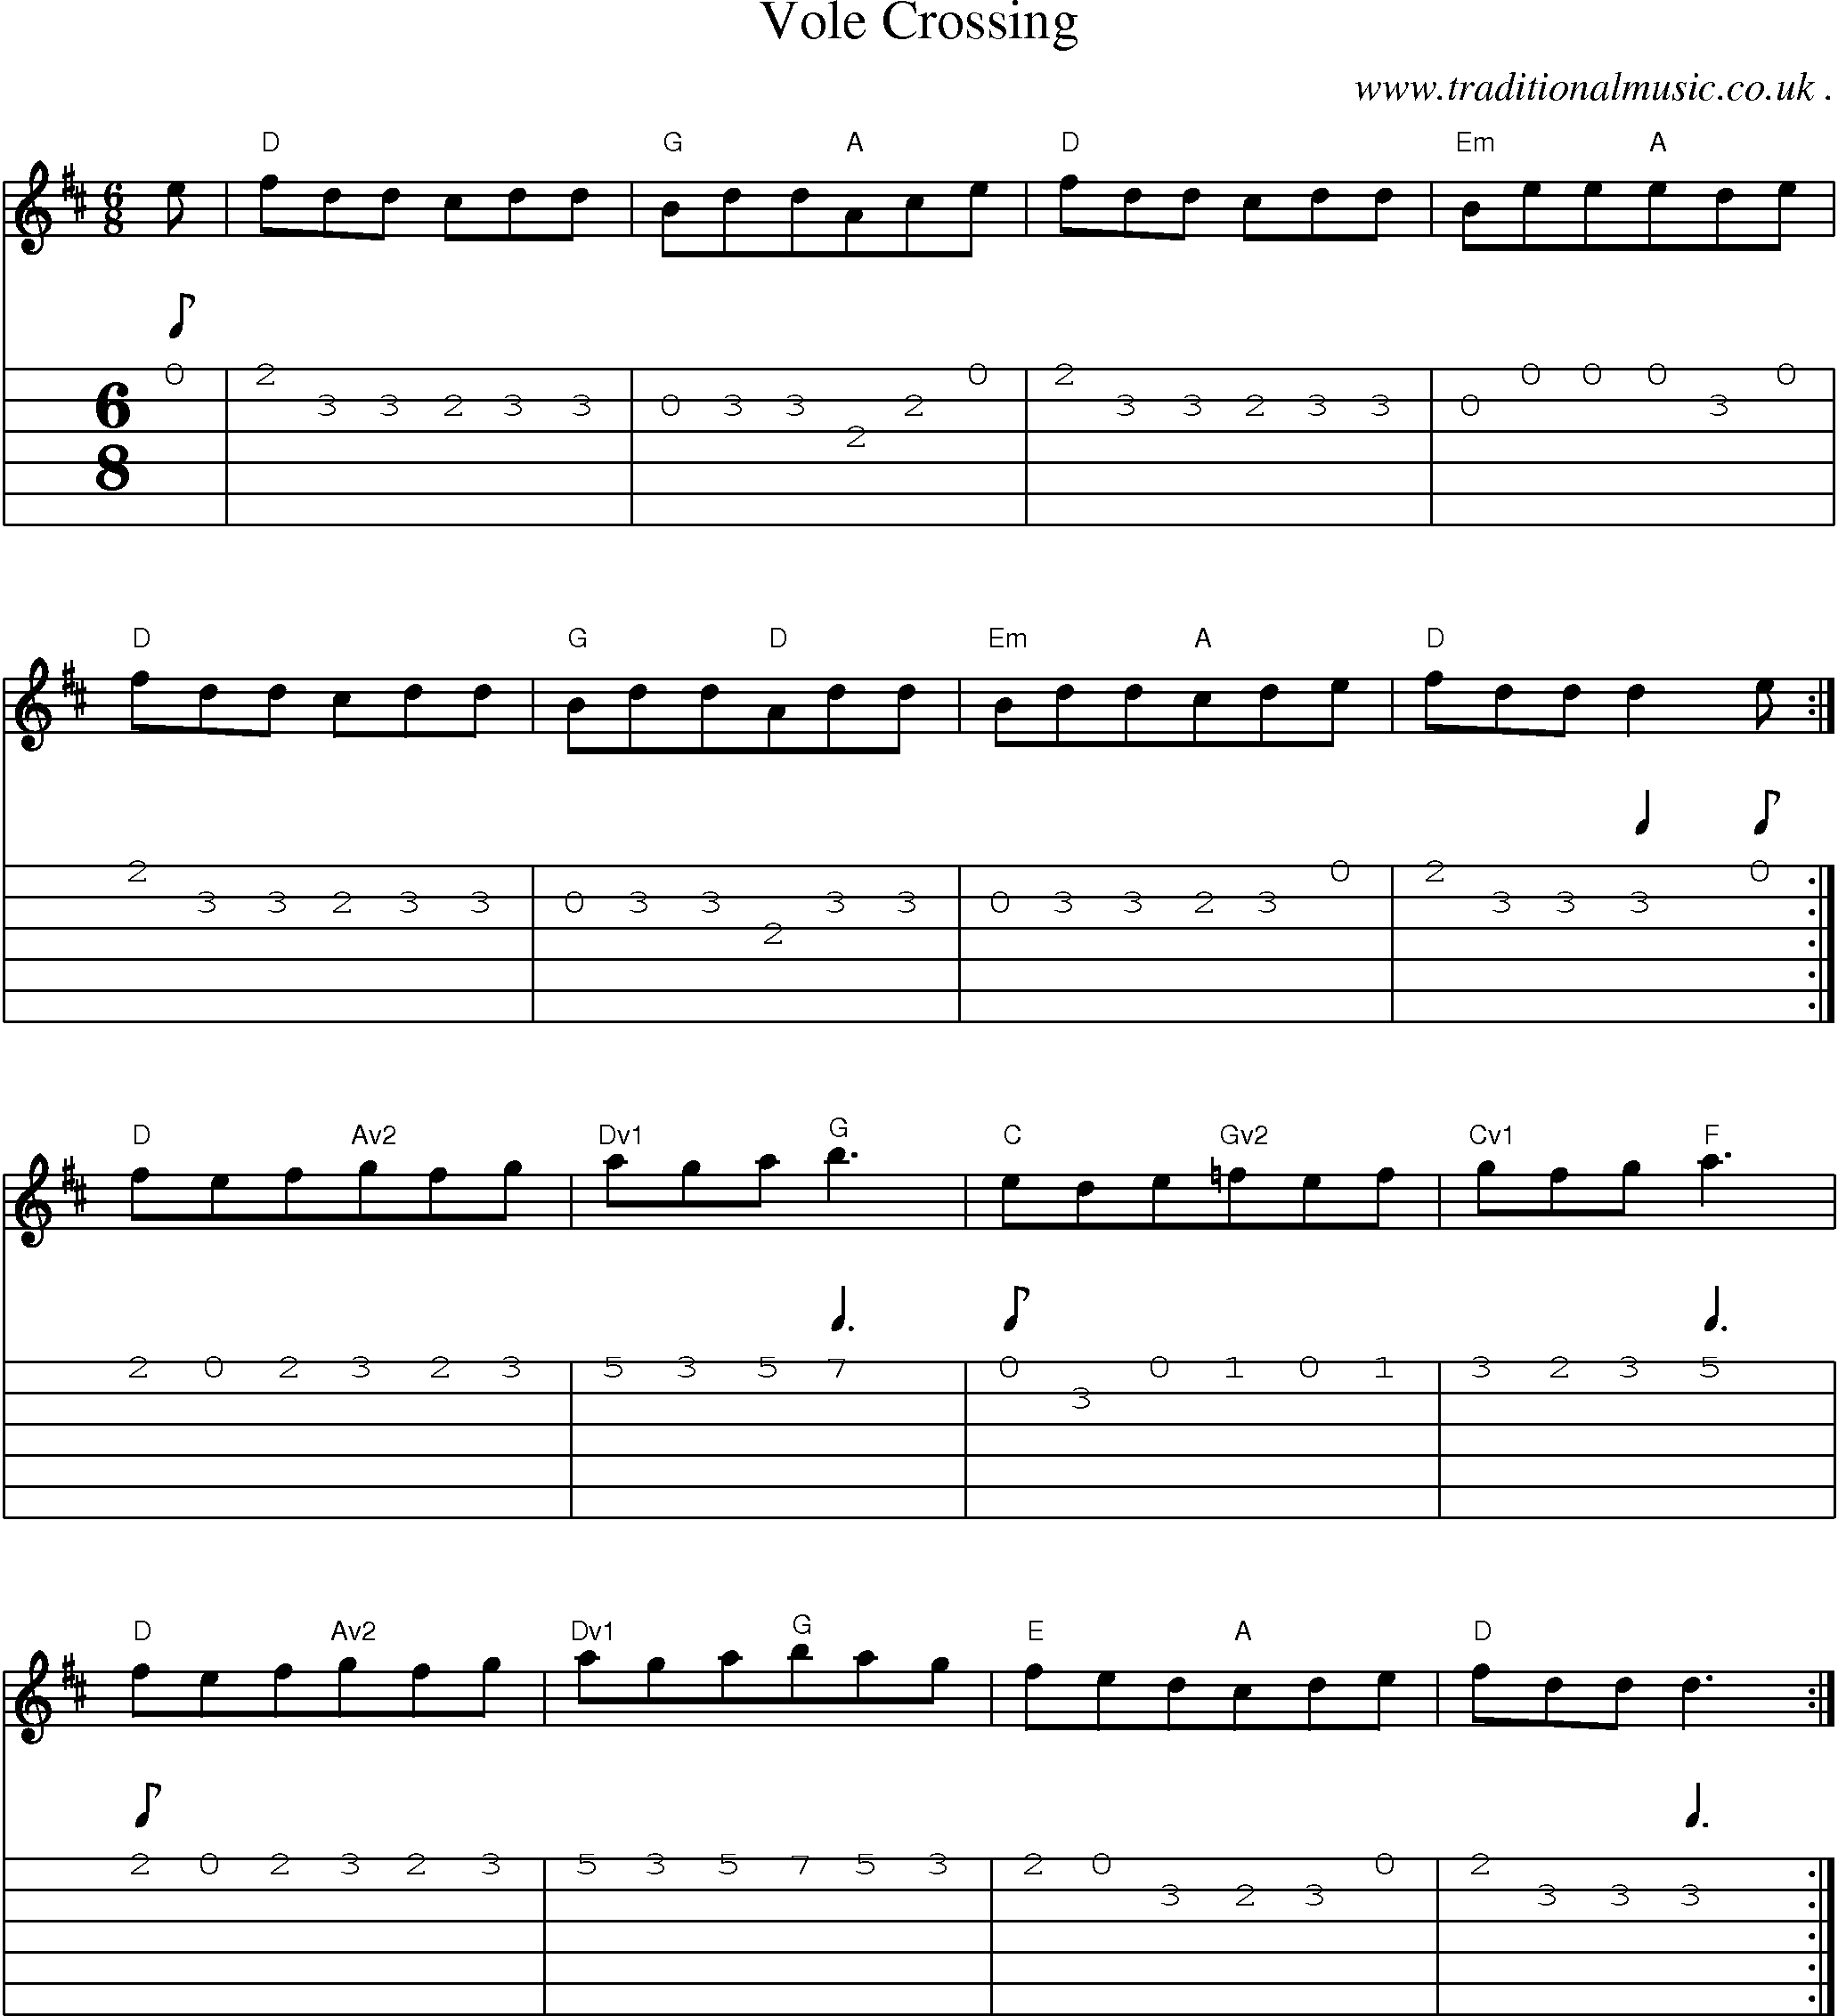 Sheet-Music and Guitar Tabs for Vole Crossing